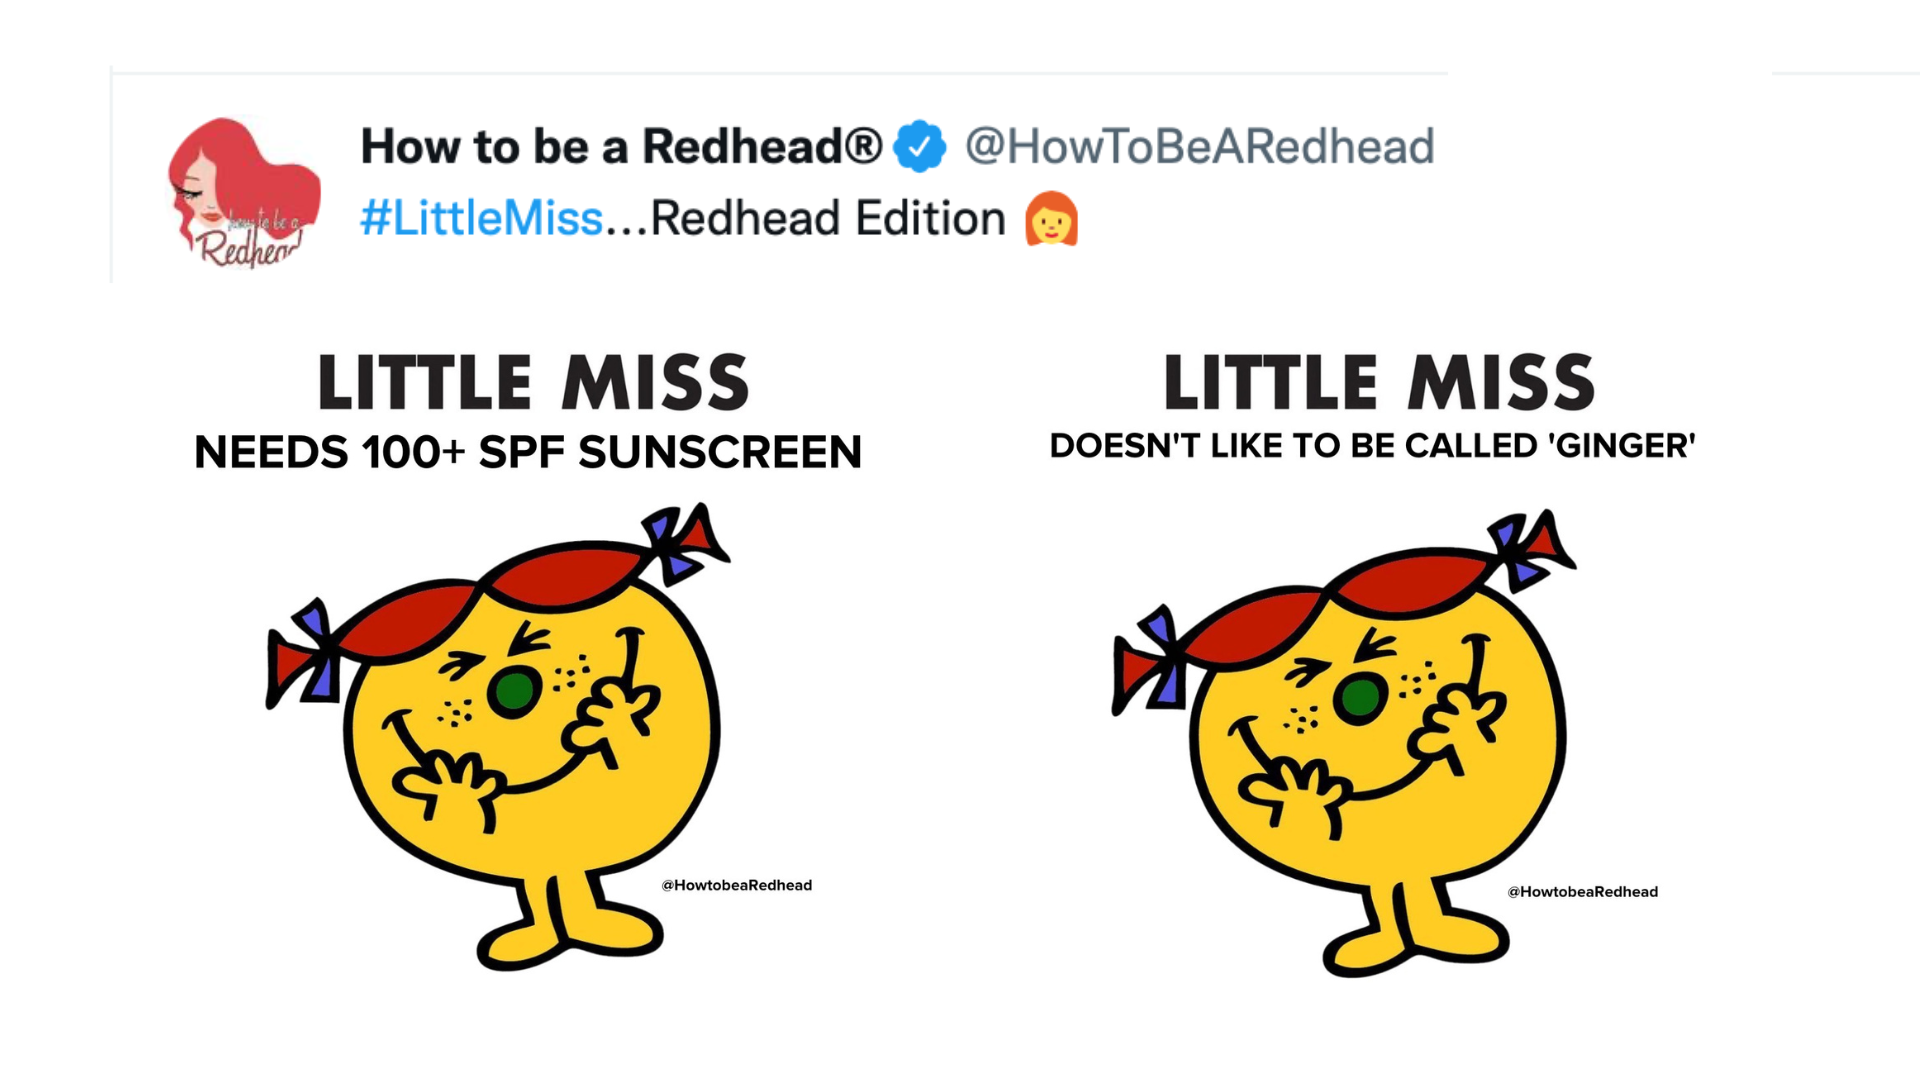 Everything Redheads Need To Know About the ‘Little Miss’ Trend Going Viral on Social Media